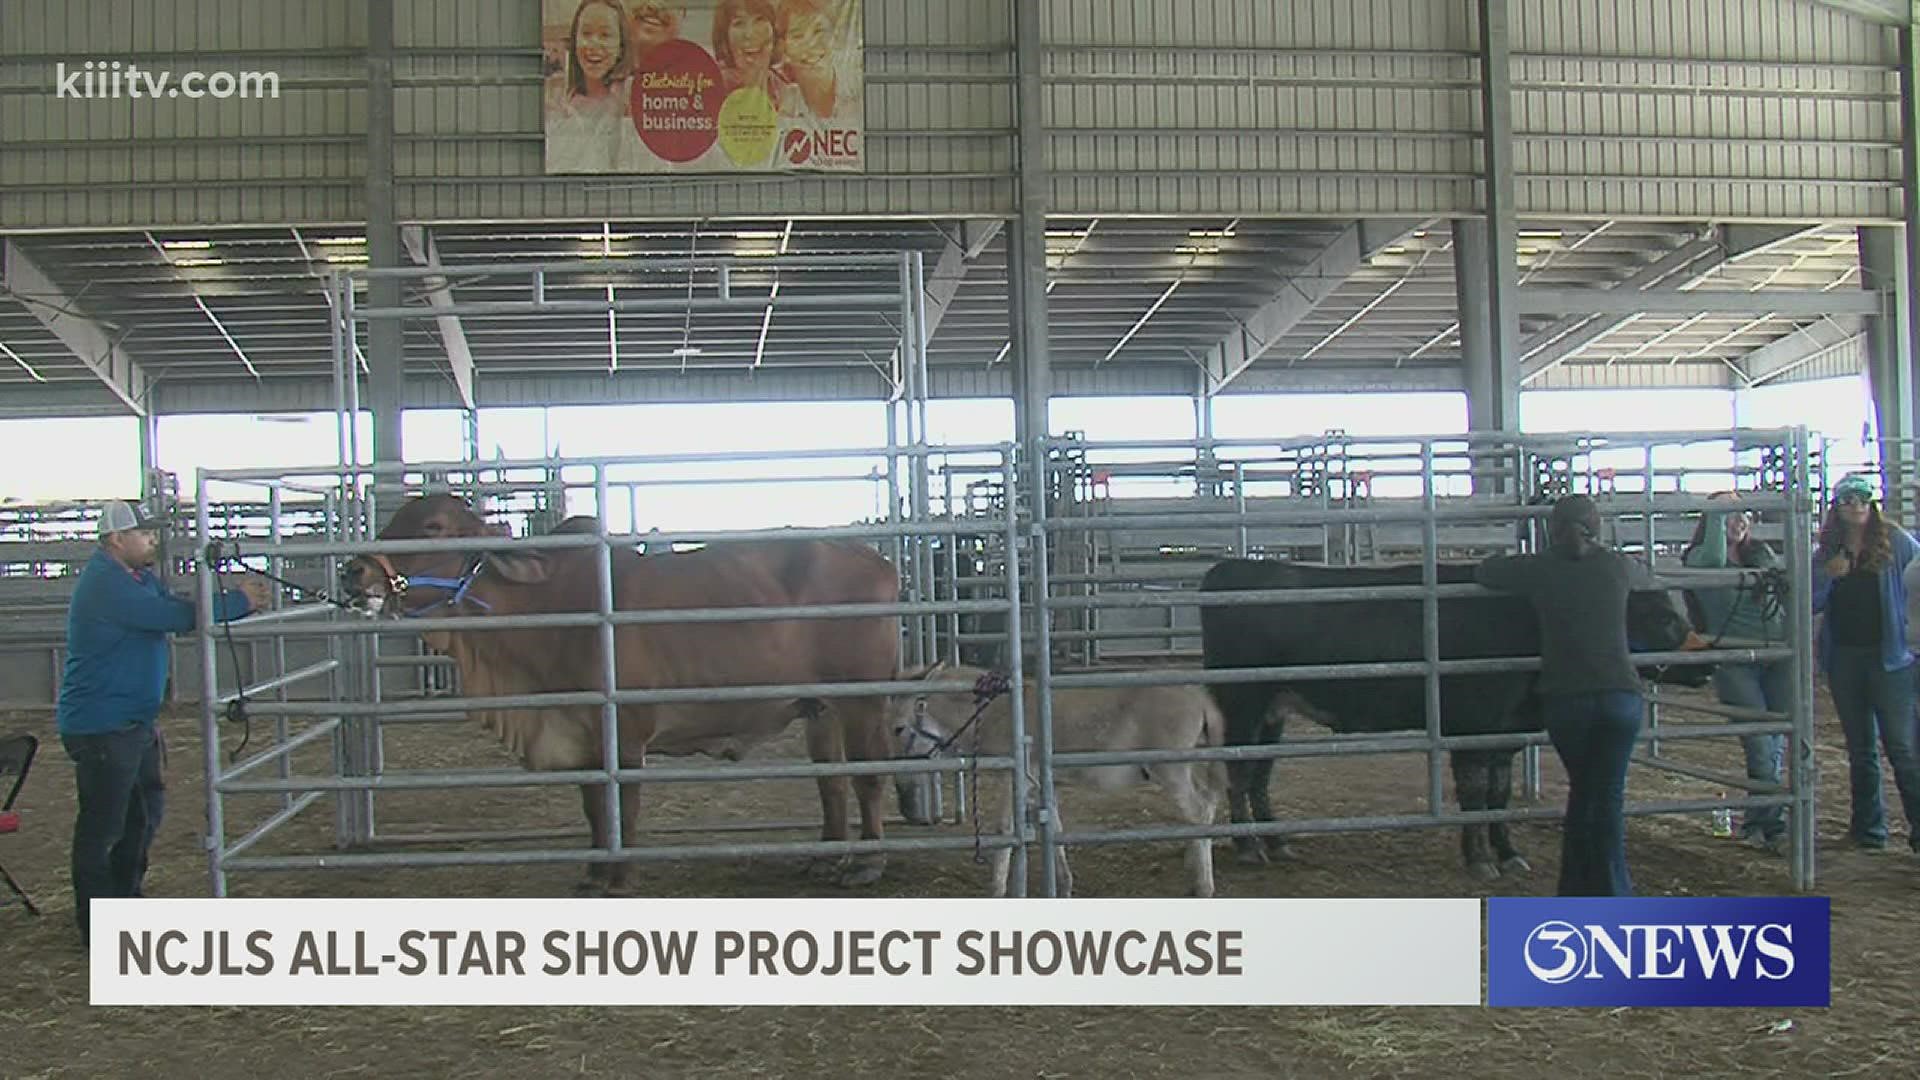 NCJLS hosts all-star show project showcase in Robstown